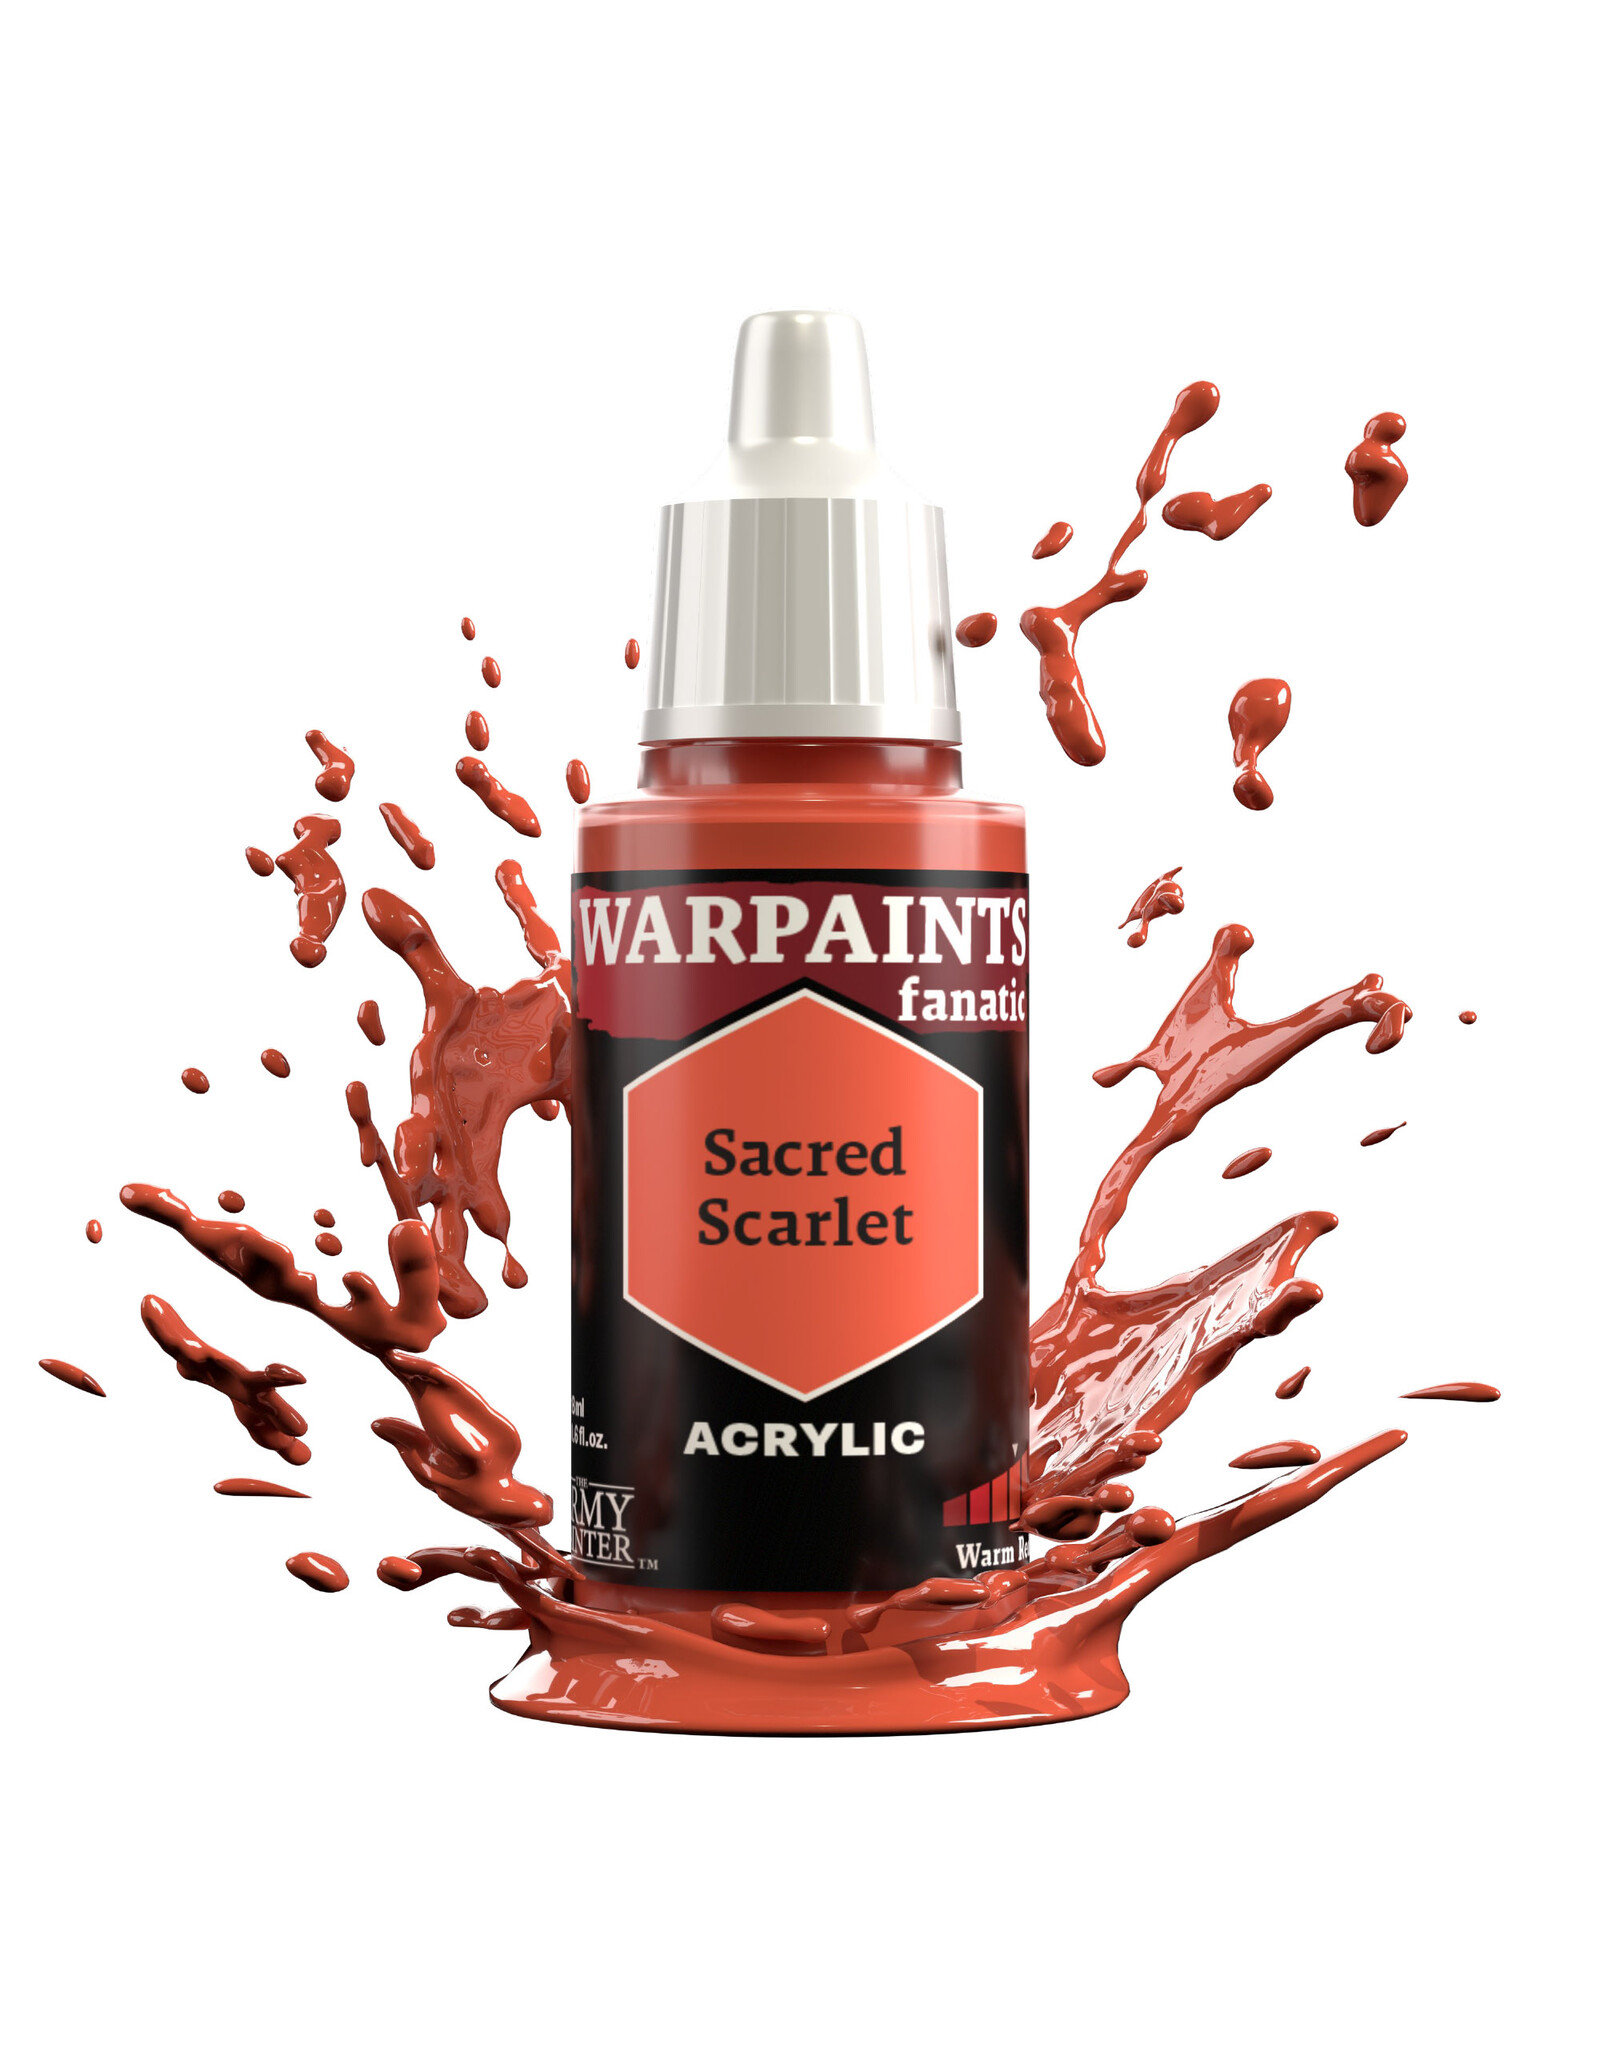 The Army Painter The Army Painter Warpaints Fanatic: Sacred Scarlet